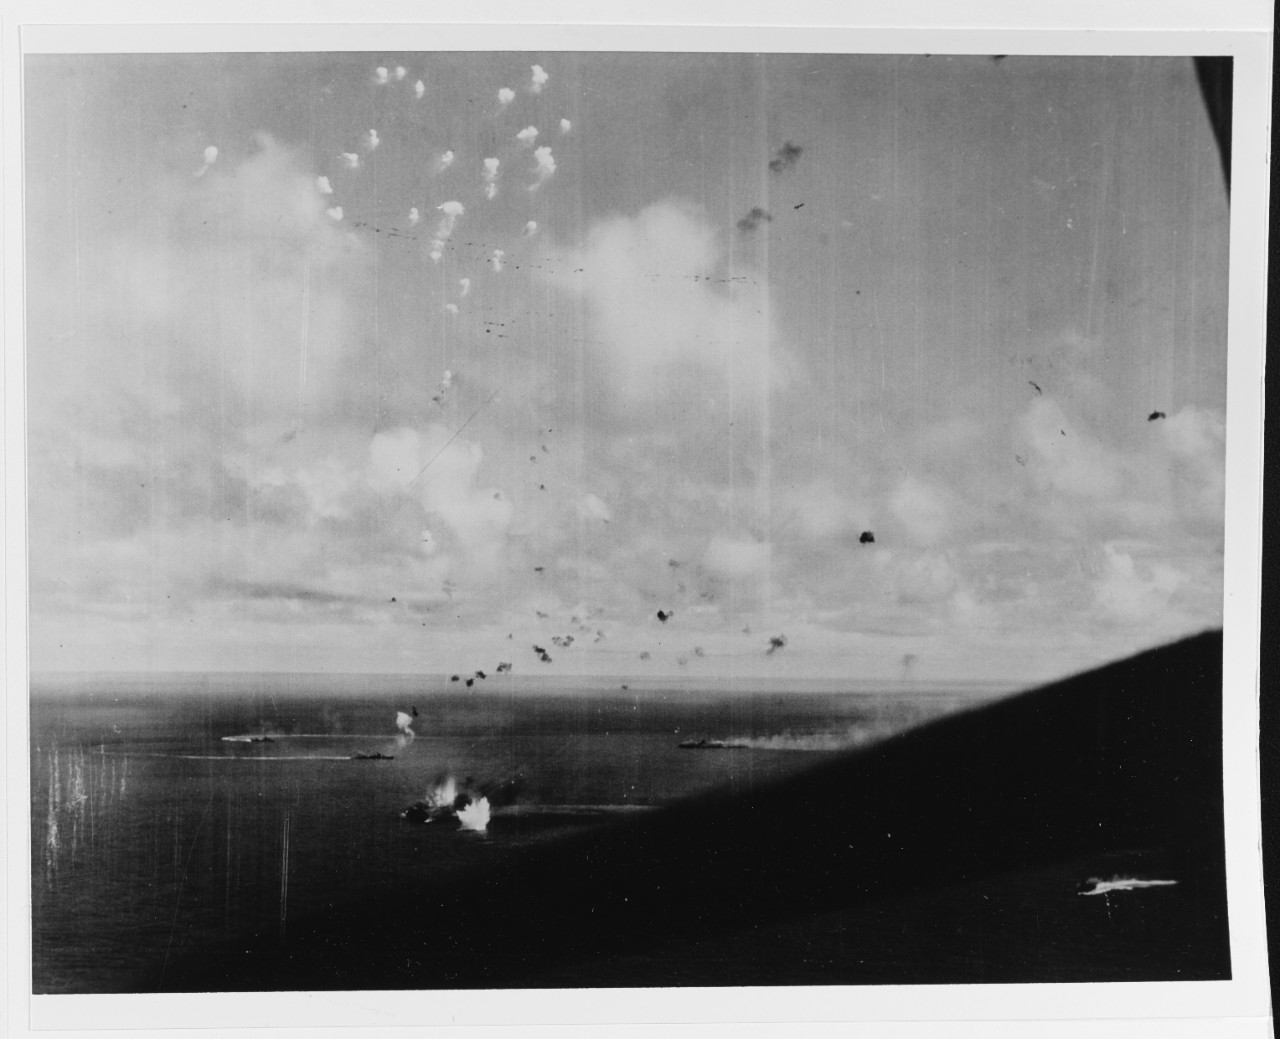 Photo #: NH 95786  Battle off Cape Engano, 25 October 1944